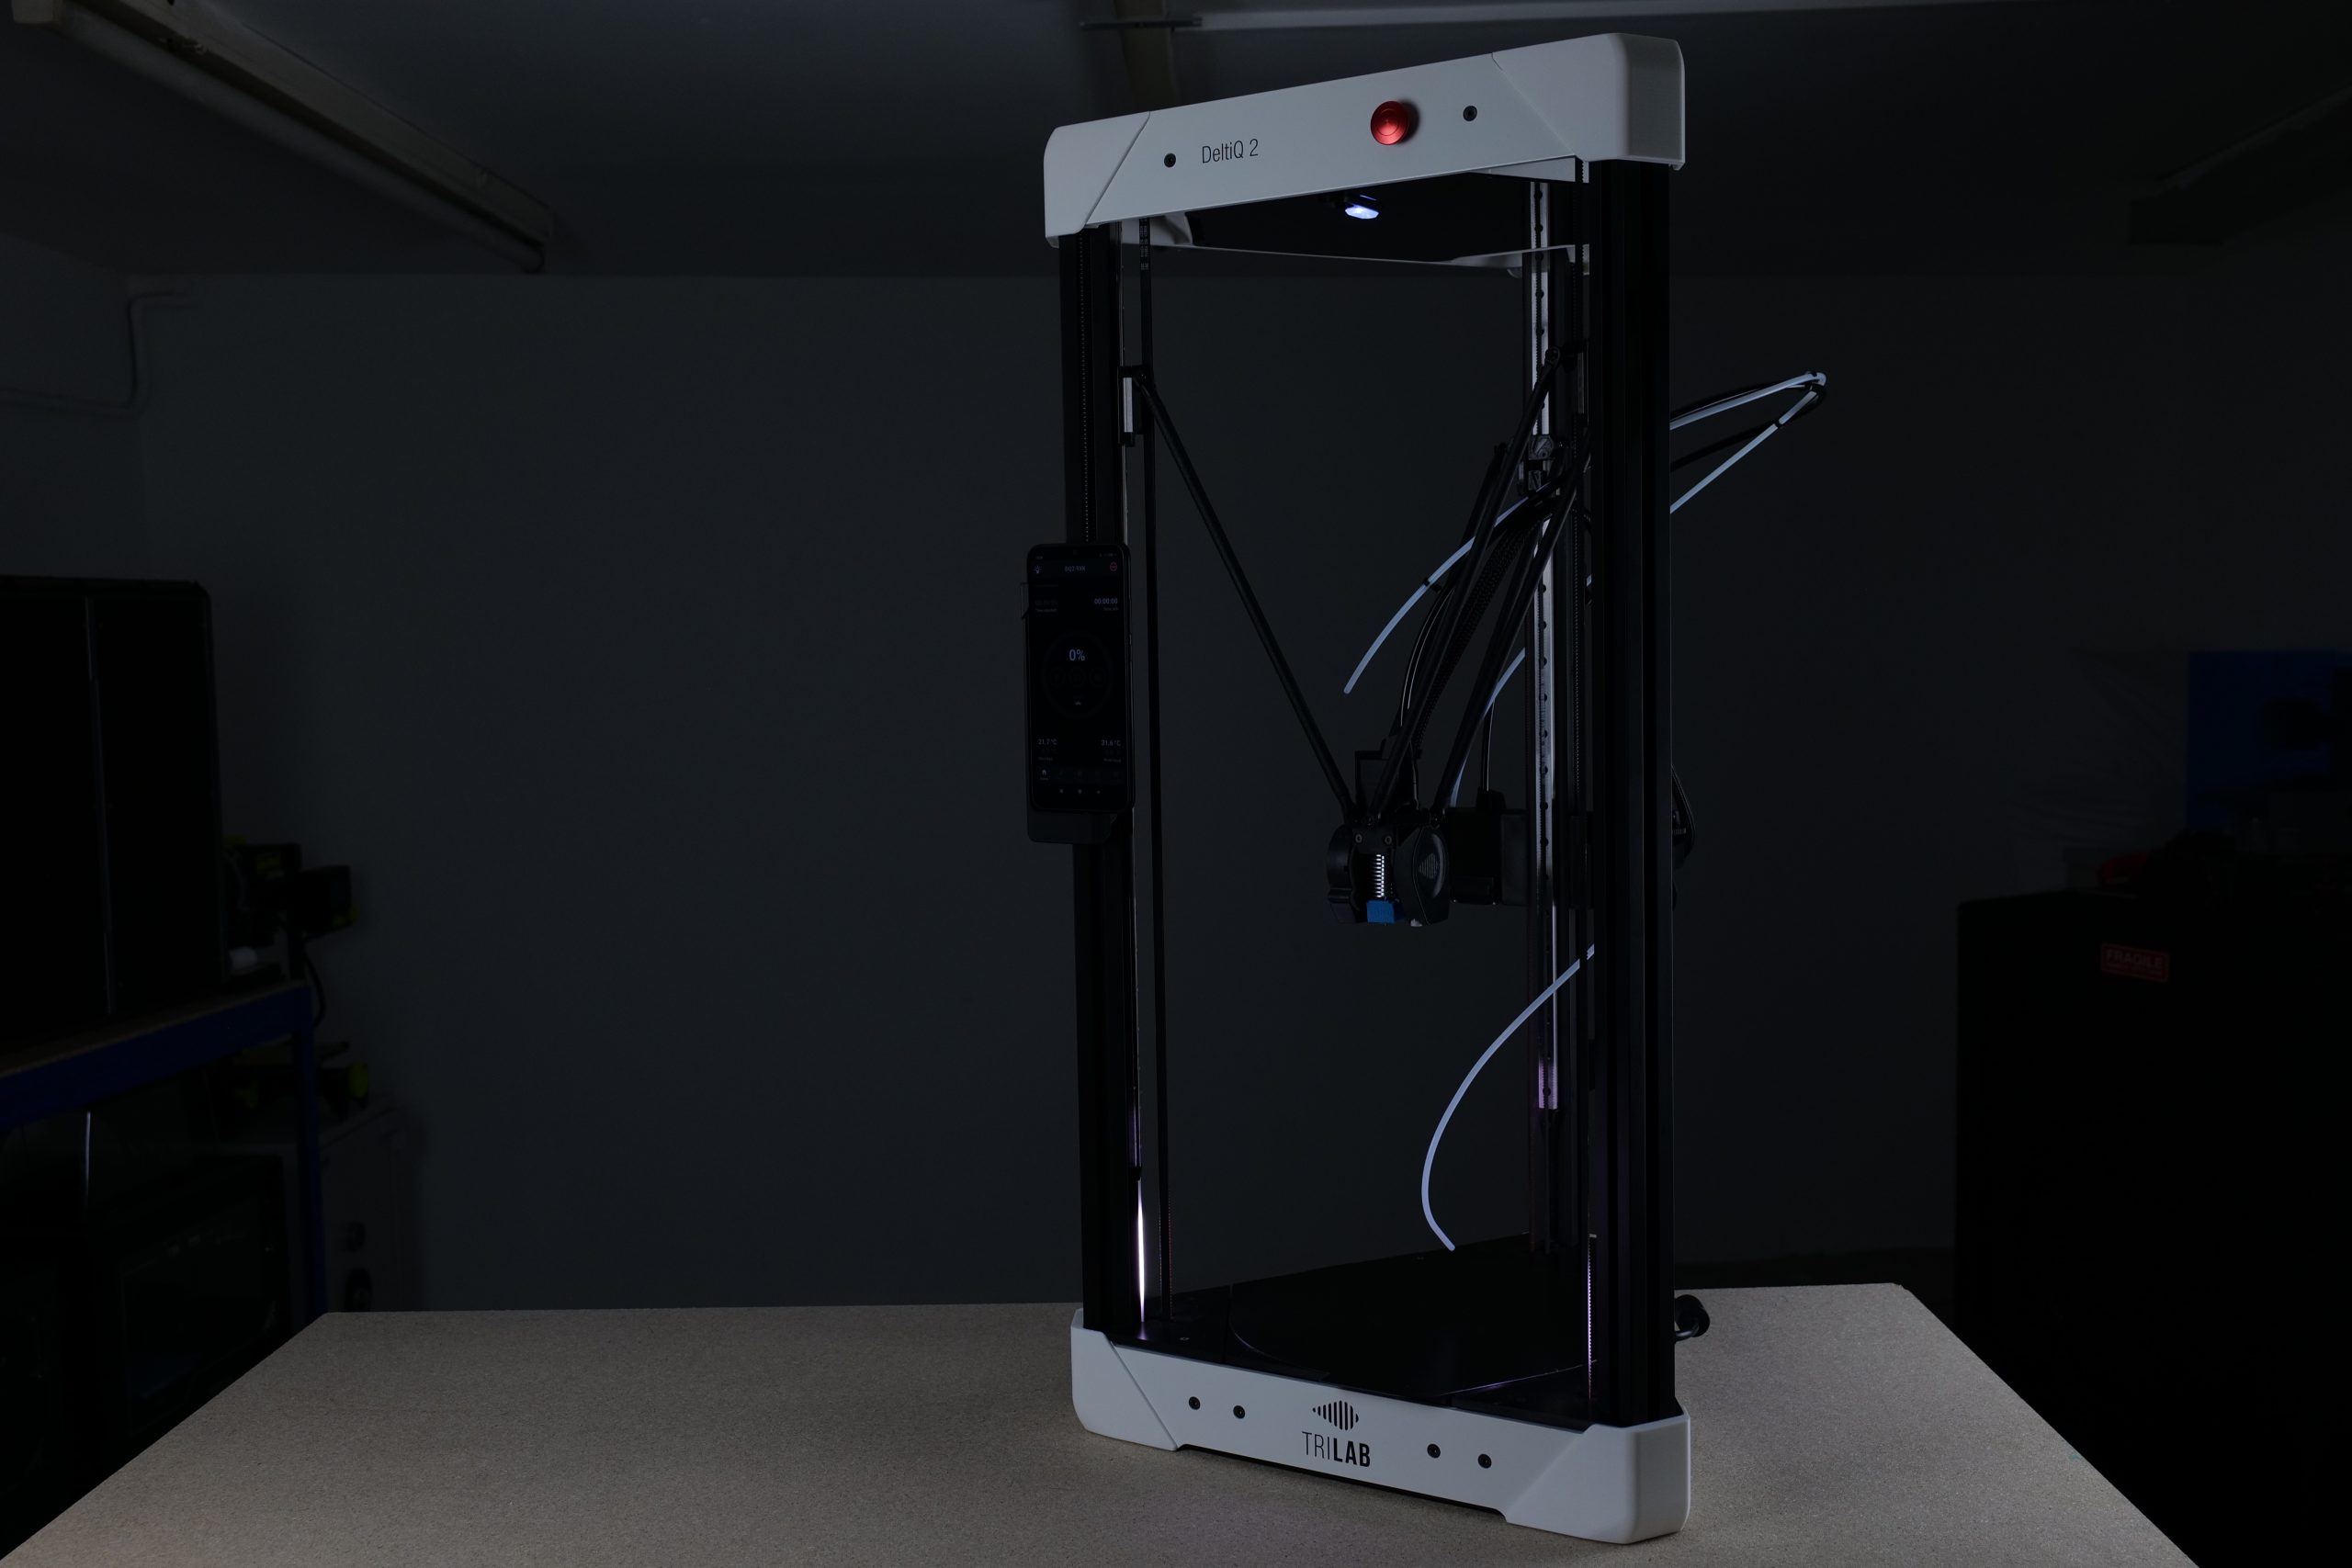 The DeltiQ 2 build platform. Photos by 3D Printing Industry.